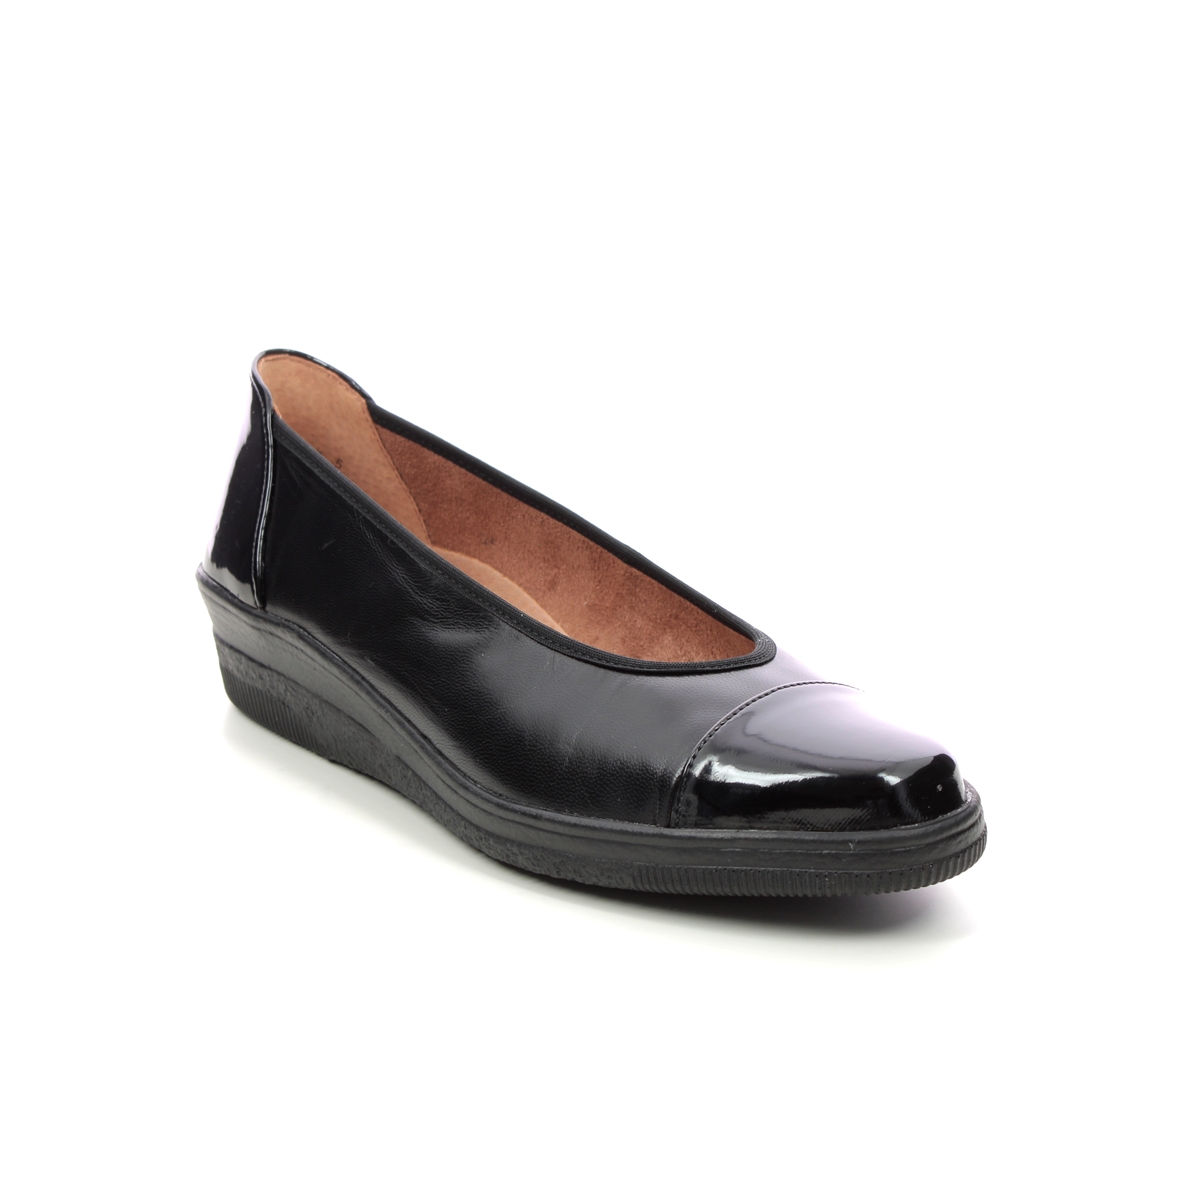 Gabor Petunia Black Patent Leather Womens Comfort Slip On Shoes 06.402.37 in a Plain Leather and Man-made in Size 9